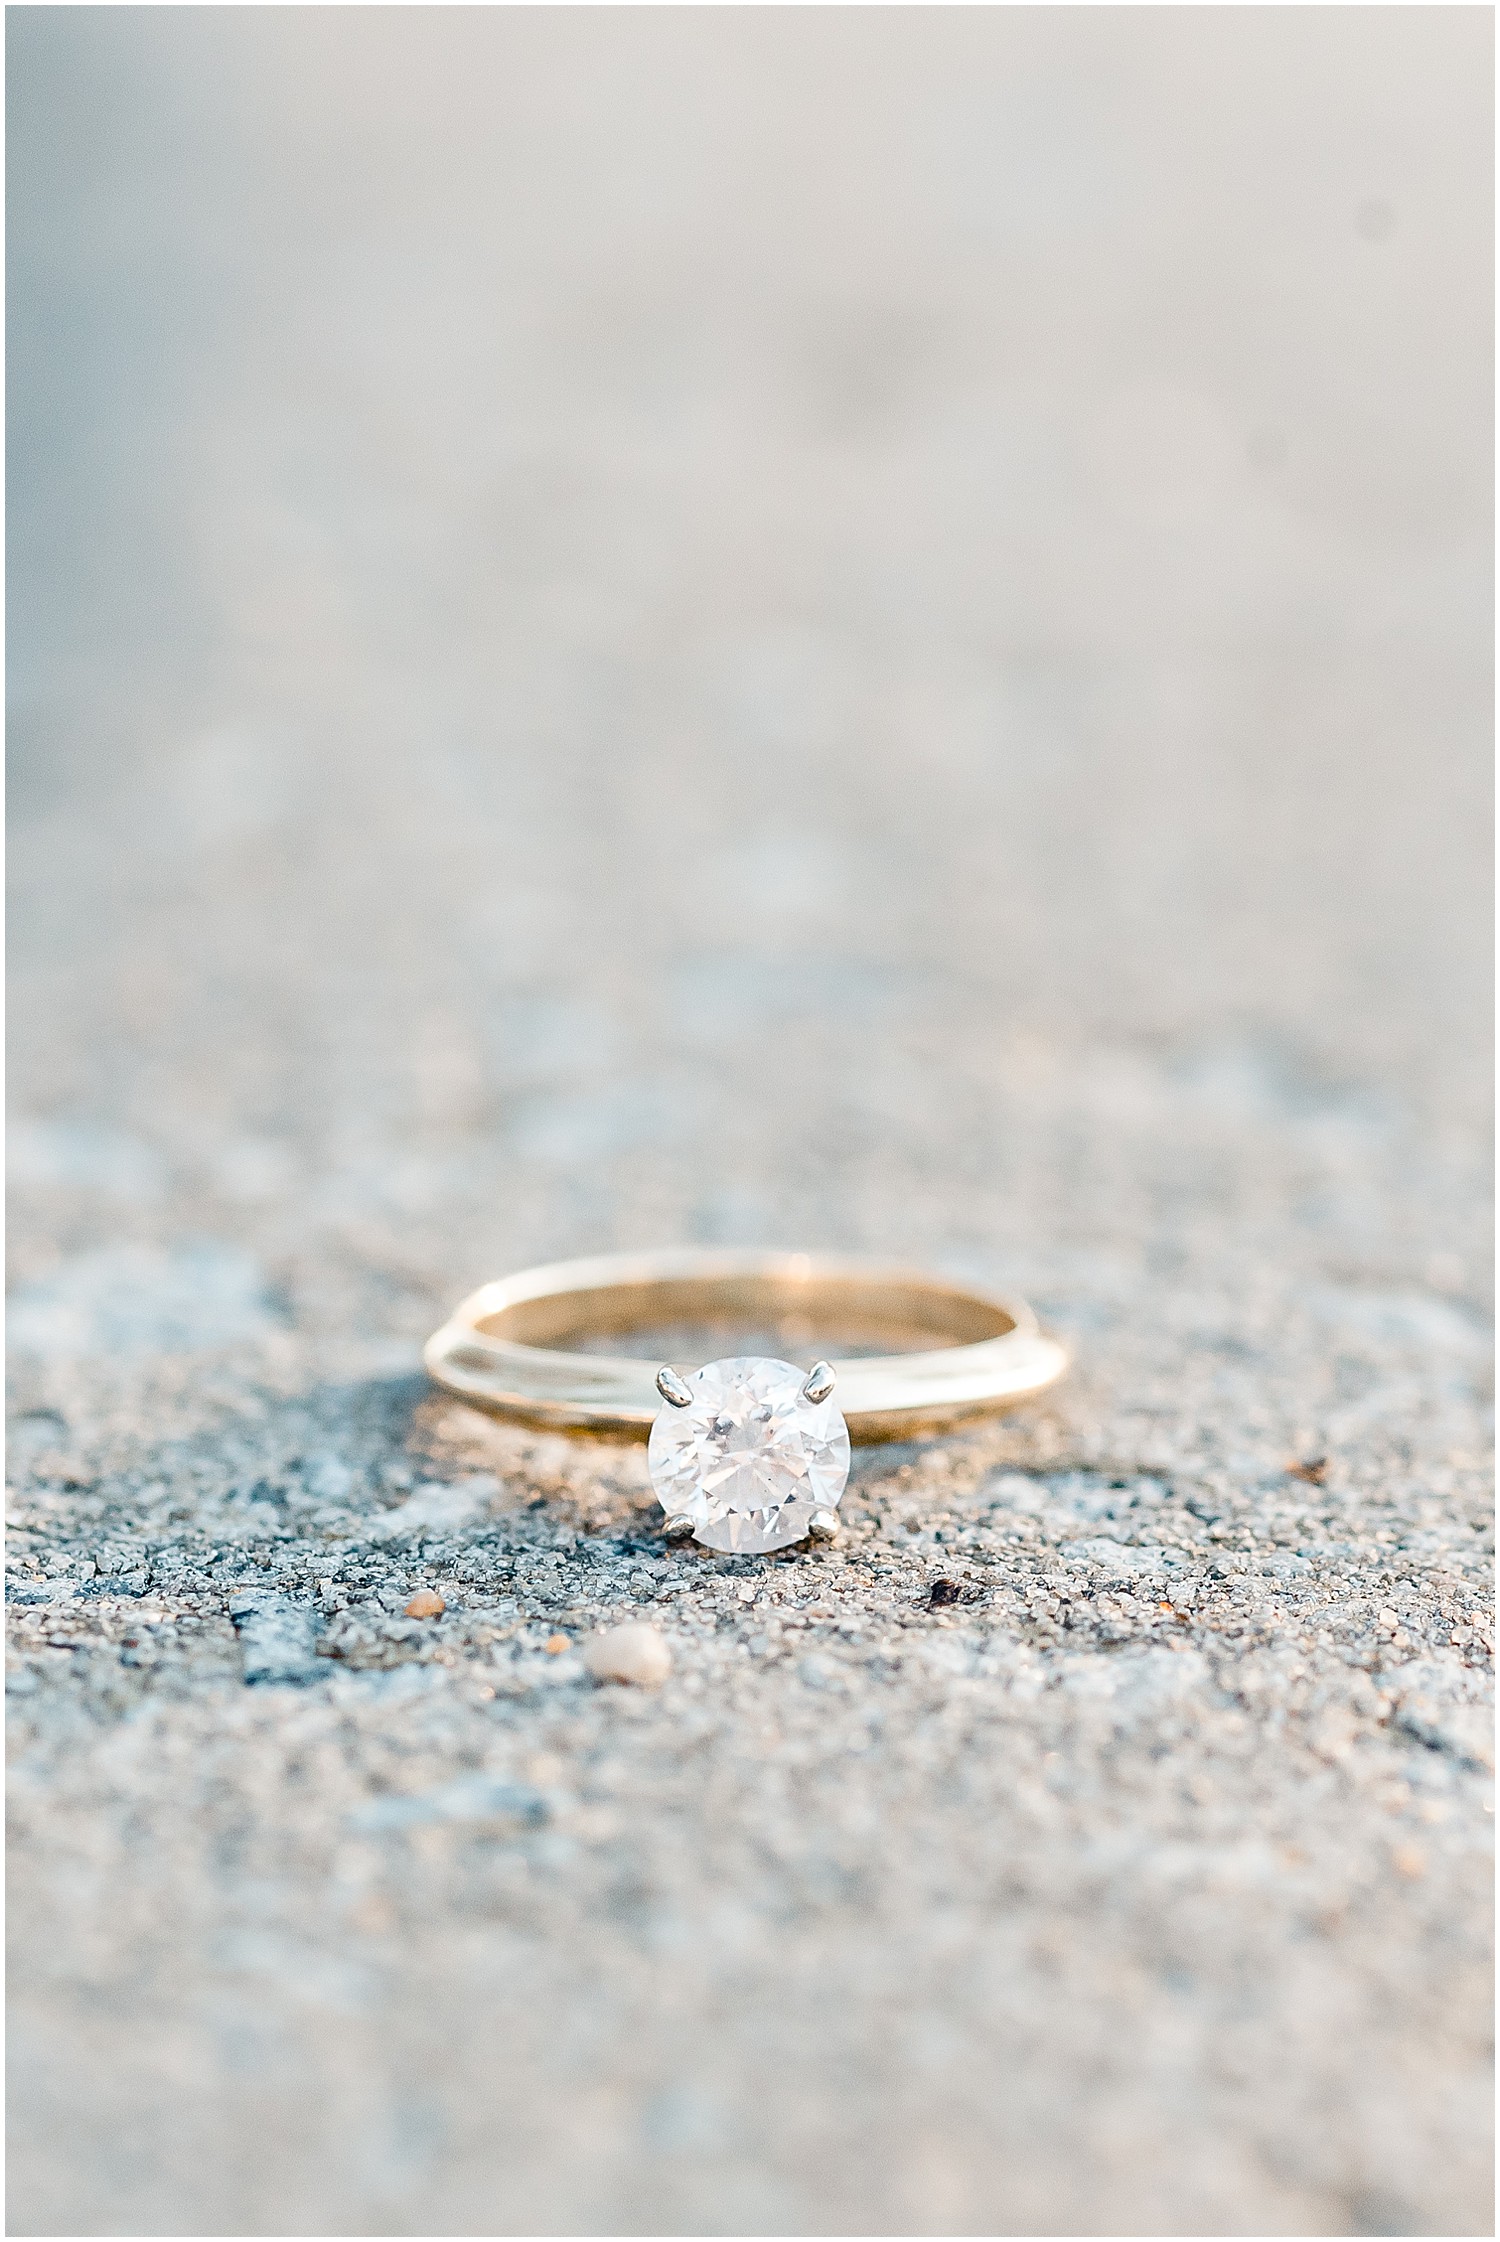 Up close image of a large single solitaire engagement ring with gold band